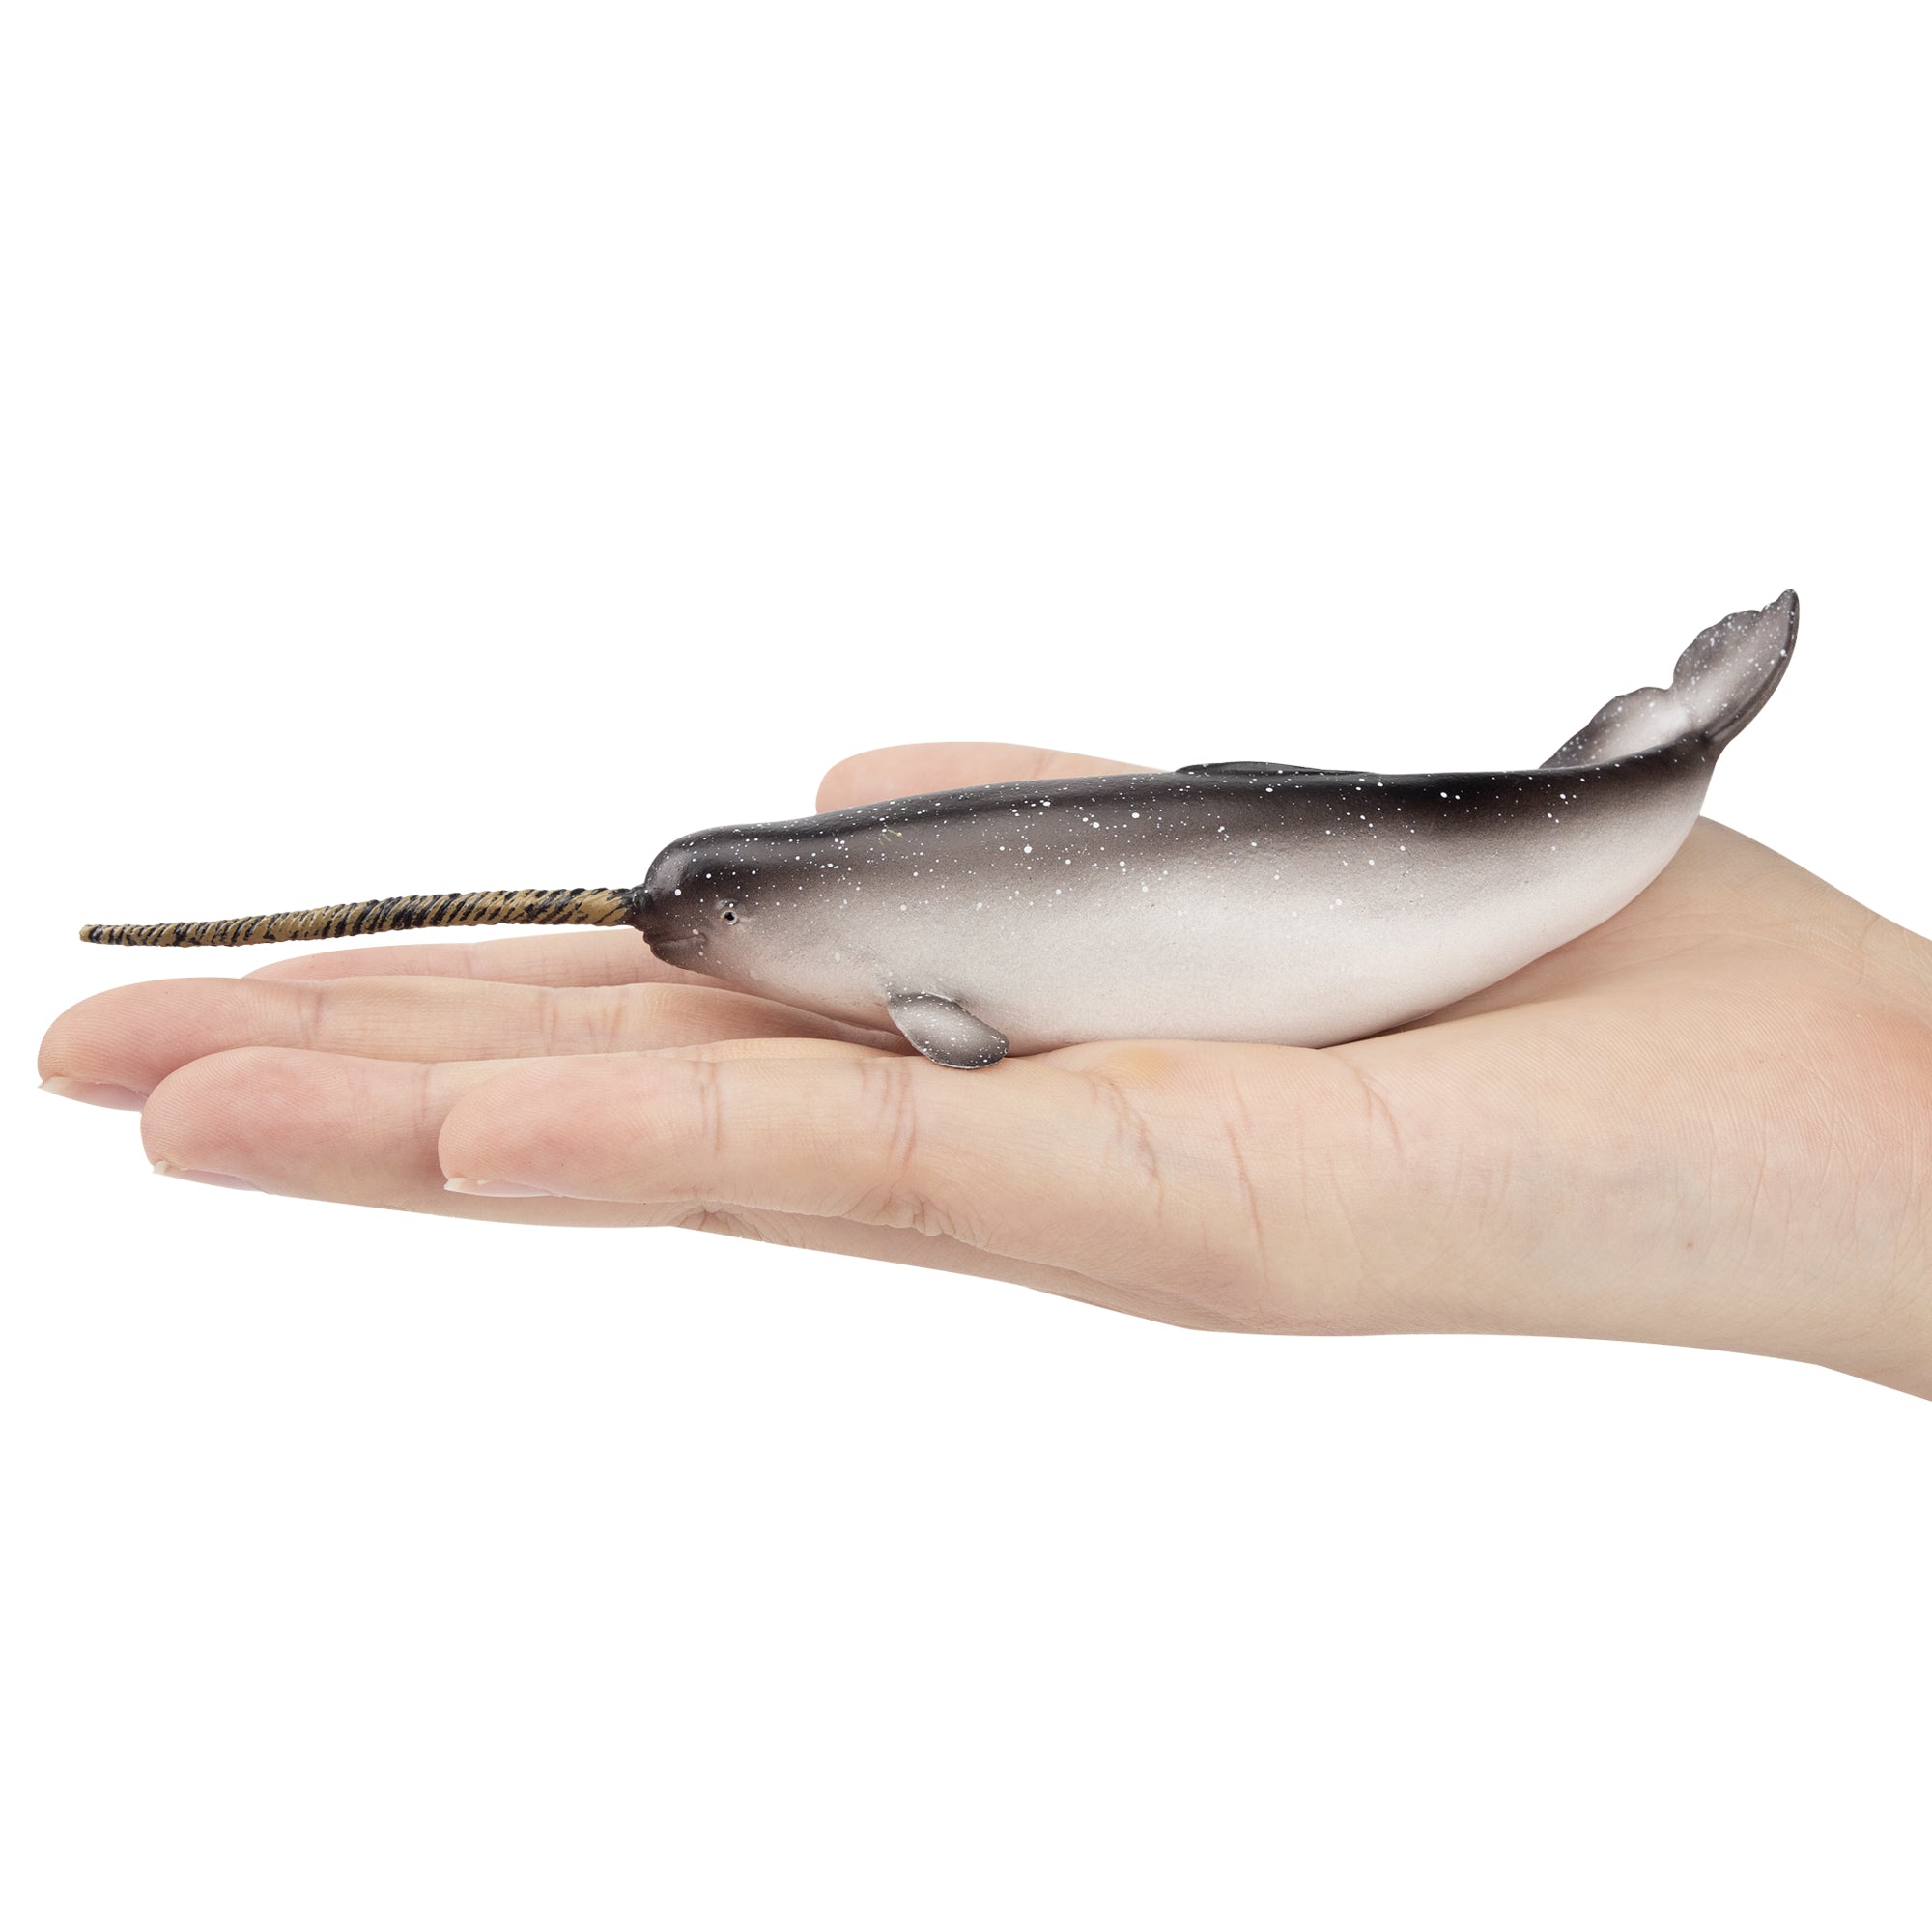 Toymany Narwhal Figurine Toy-on hand-2